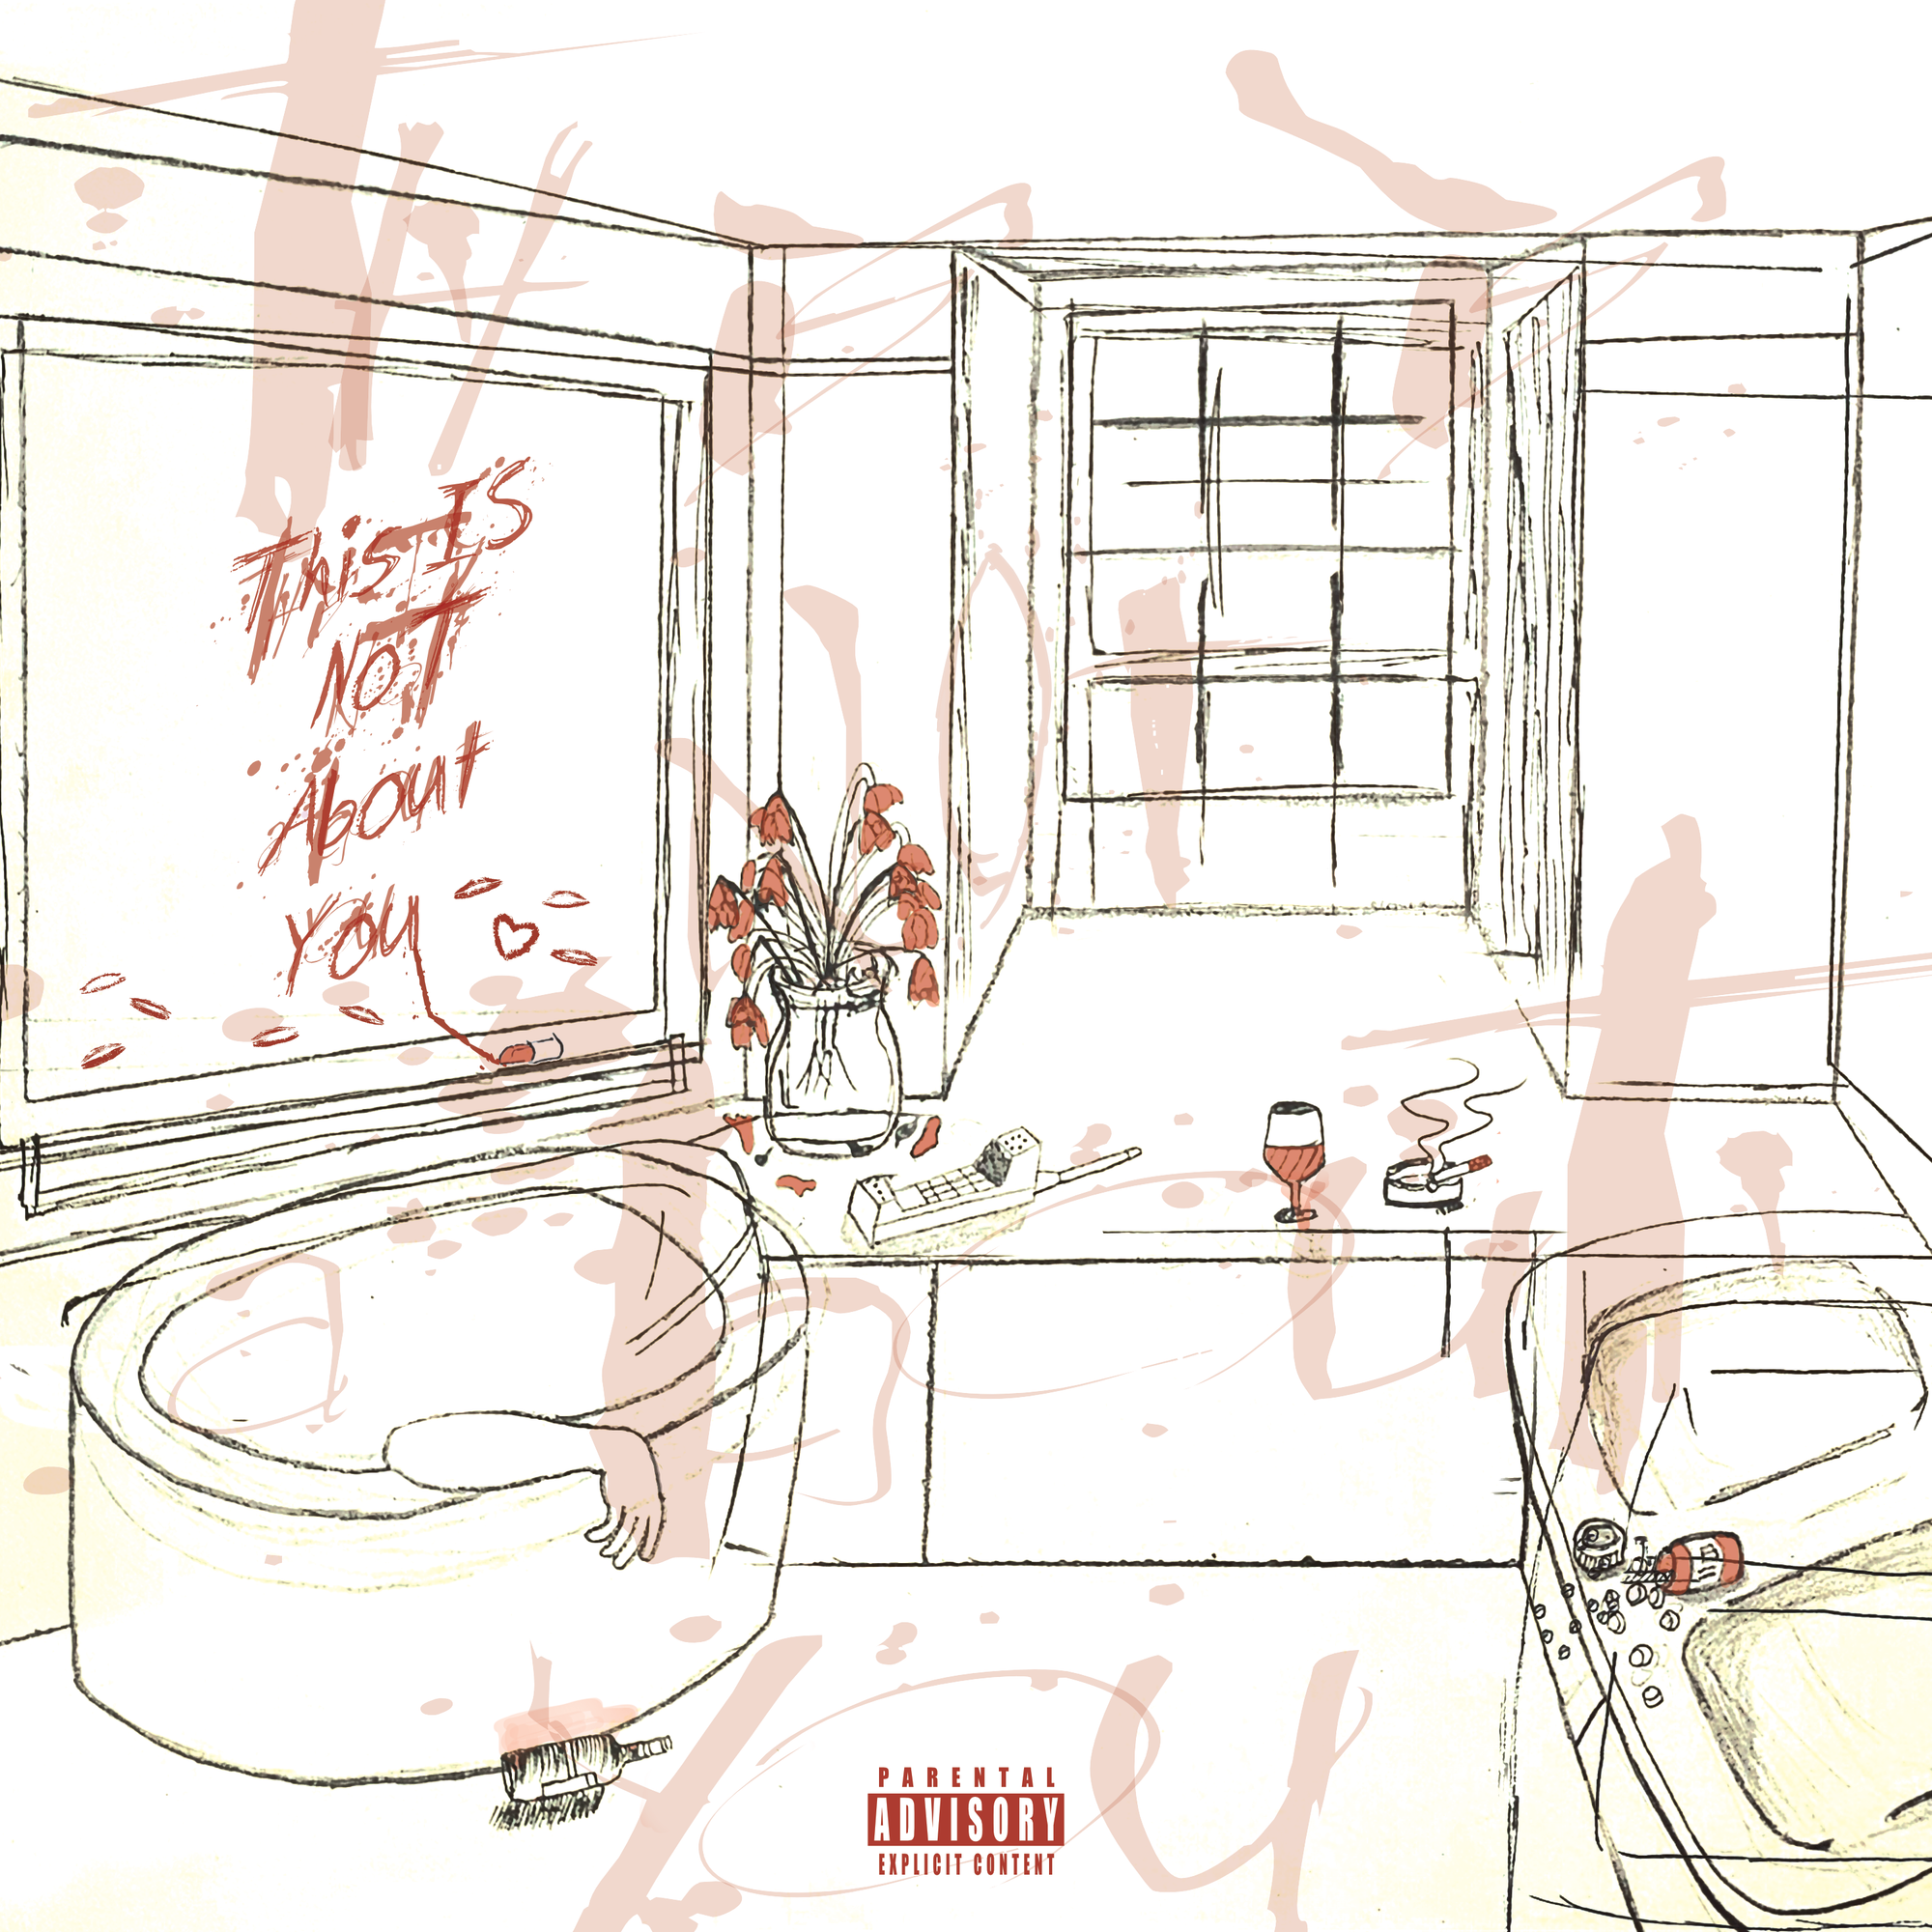 Big Homie makes his mark as one of the freshest hip-hop talents with ‘This Is Not About You’